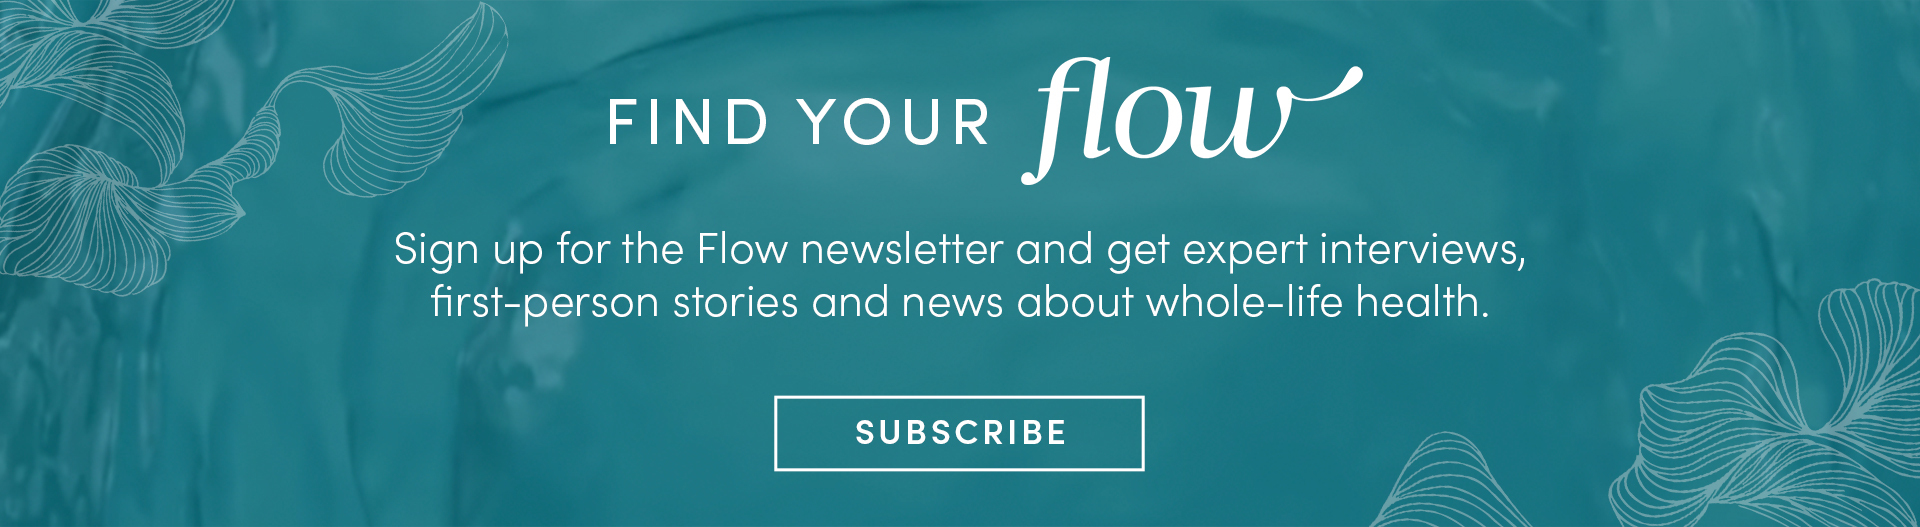 <p>Make sure to <a href="https://cloud.flow.shemedia.com/signup">subscribe here</a> for expert interviews, first-person stories and news about women’s whole life health, delivered straight to your inbox.</p>